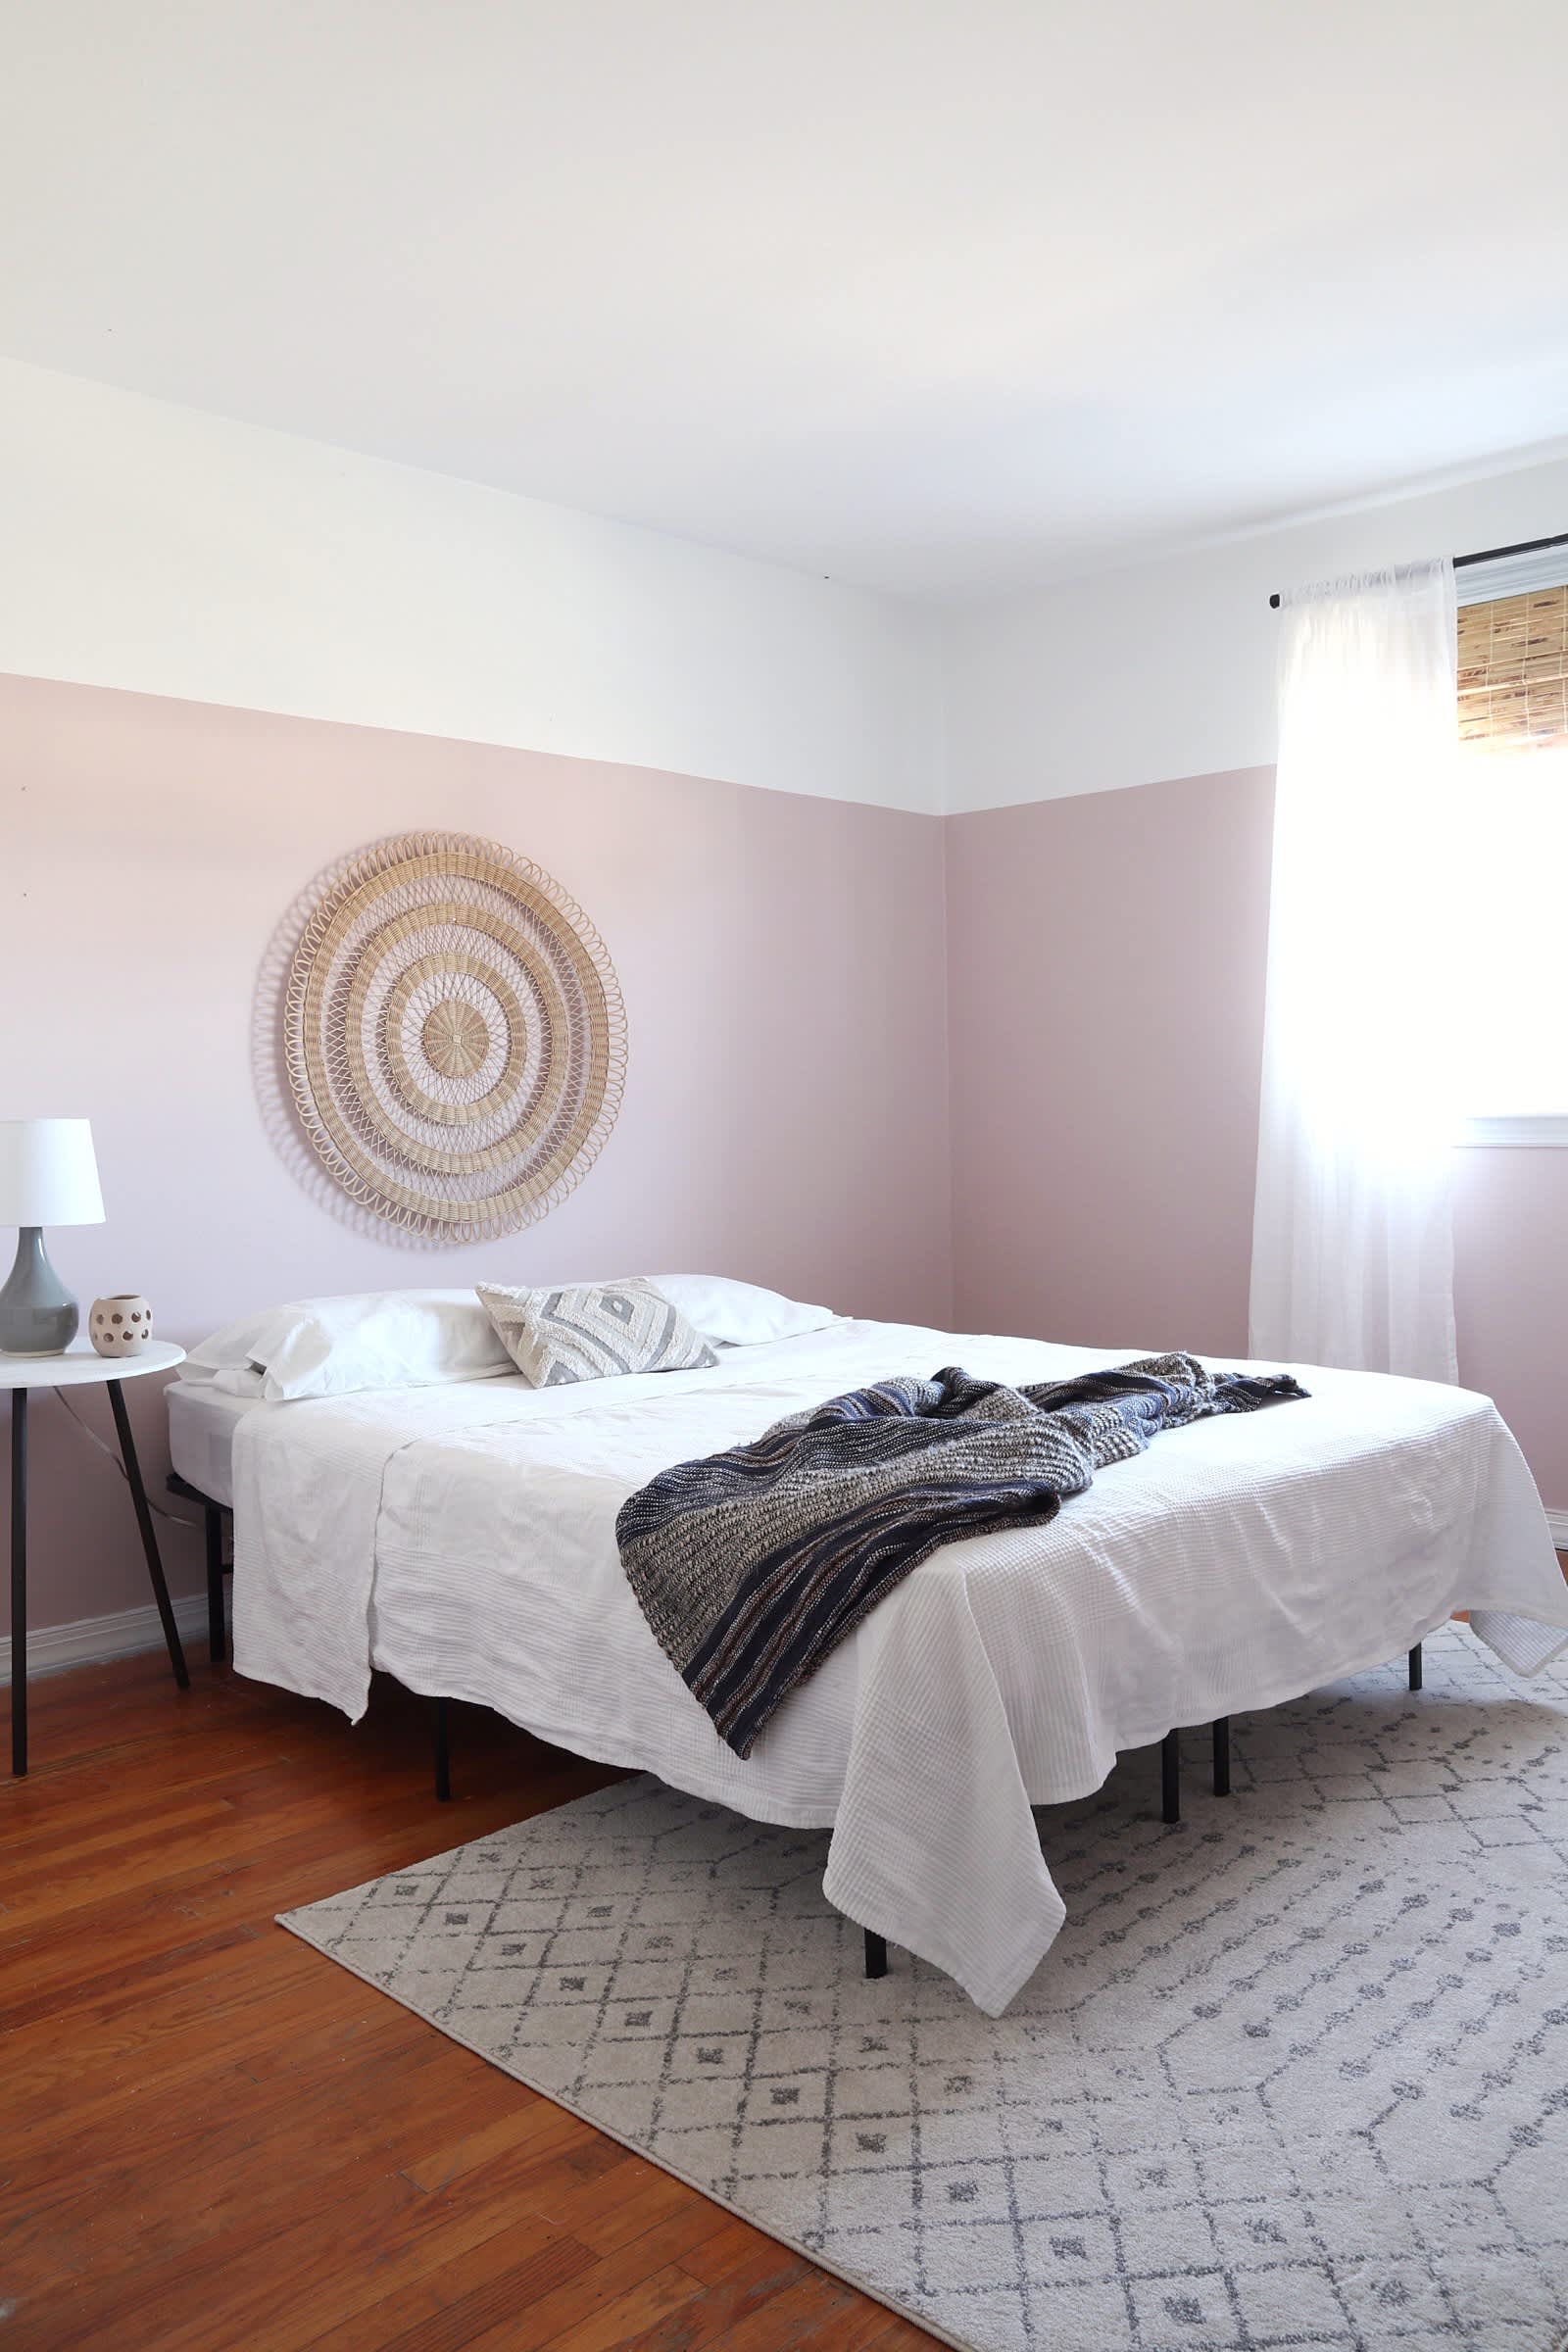 What Colors Go With Light Pink? 12 of the Best Options